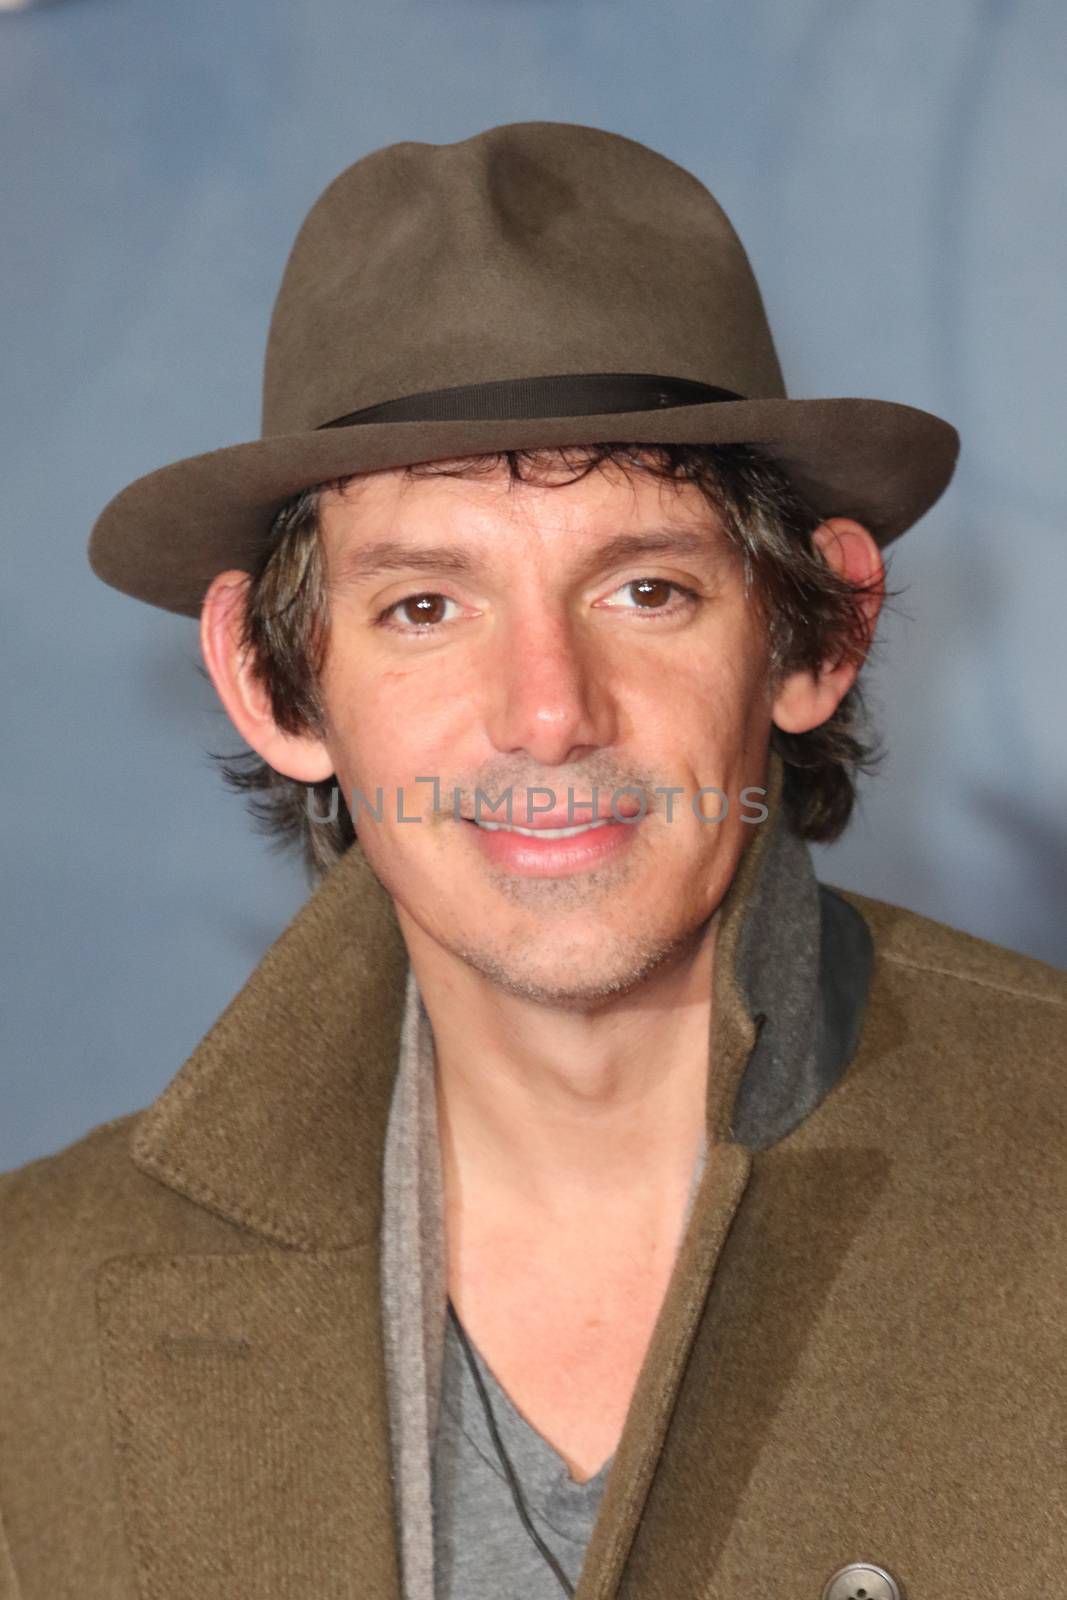 UK, London: Lukas Haas arrives on the red carpet at Leicester Square in London on January 14, 2016 for the UK premiere of the Revenant, Alejandro Gonzalez Inarritu's Oscar-nominated film starring Leonardo DiCaprio.